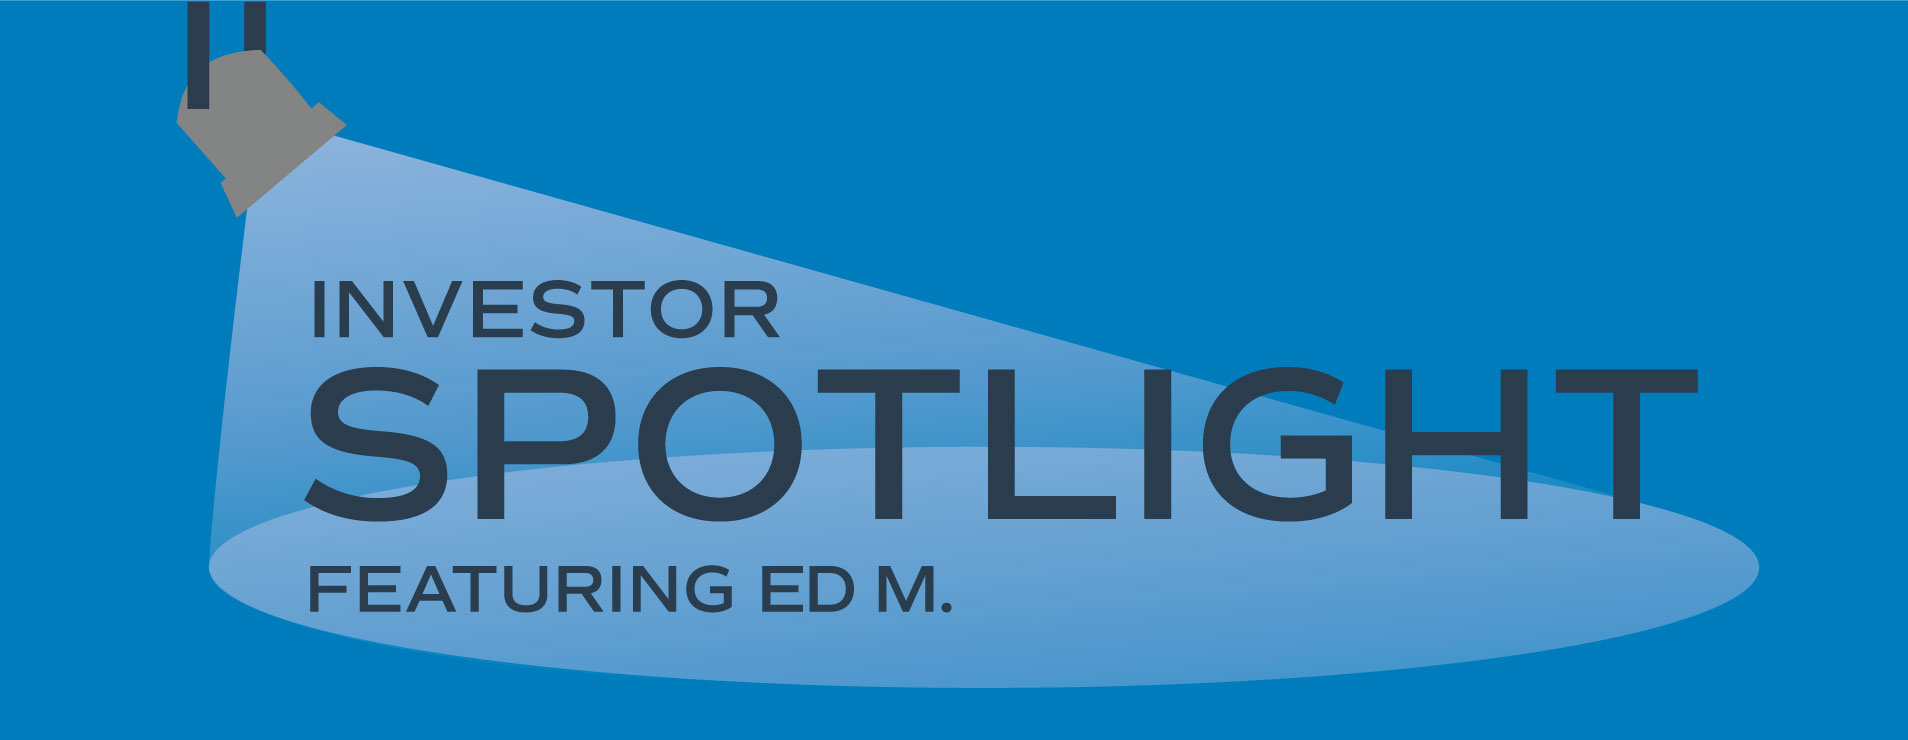 Investor Spotlight: Ed M., A Tech Executive Who Invested After He Sold Stock